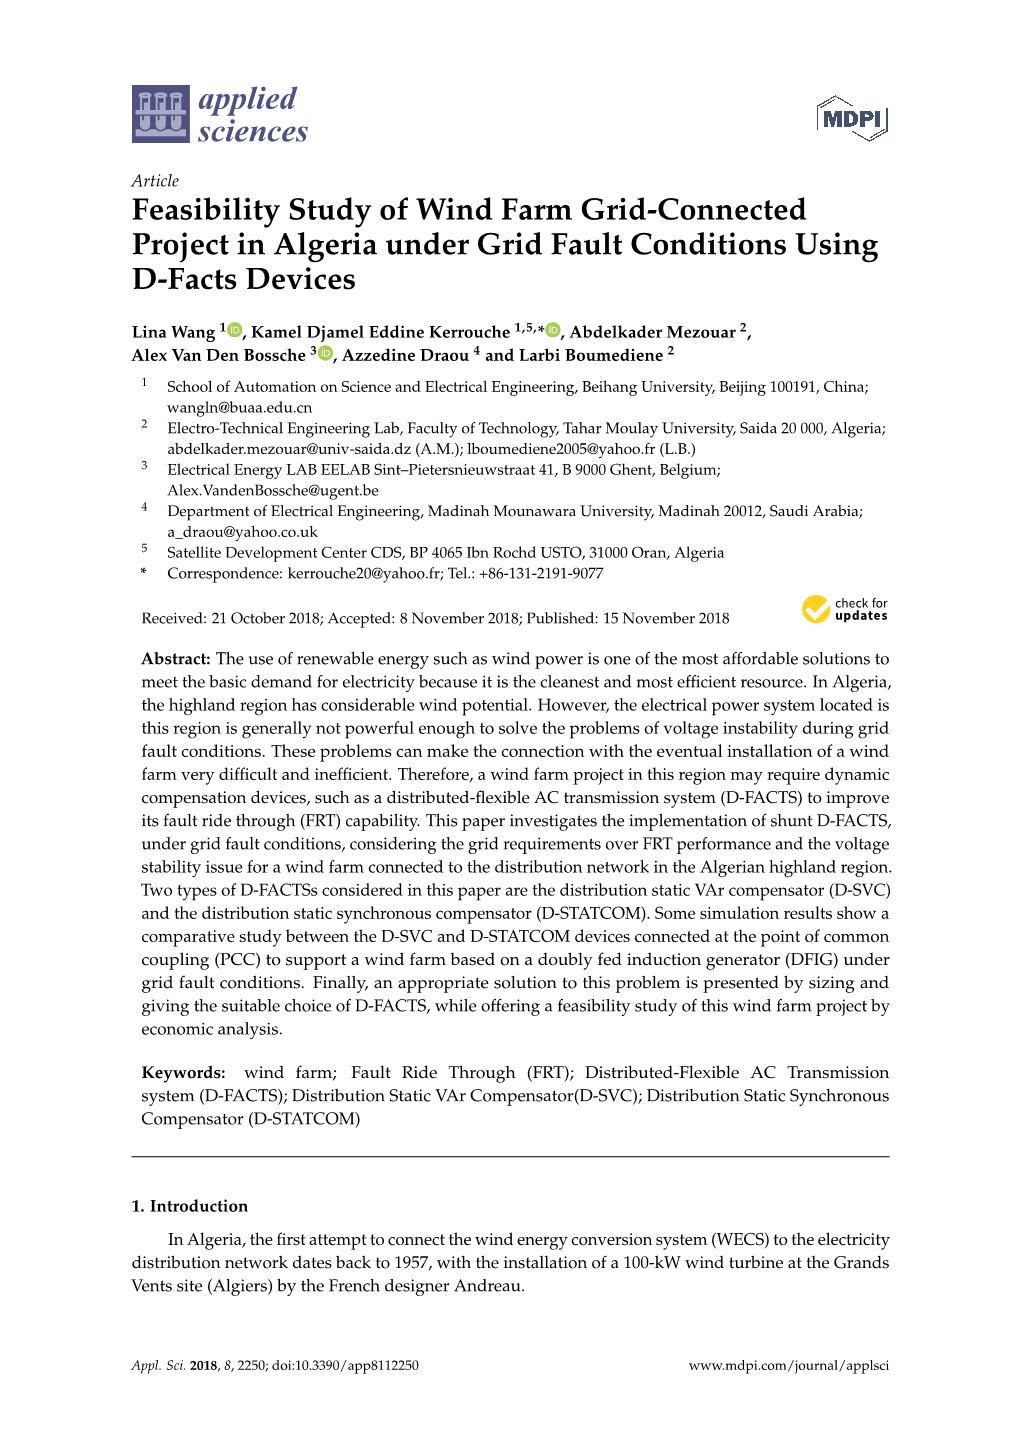 Feasibility Study of Wind Farm Grid-Connected Project in Algeria Under Grid Fault Conditions Using D-Facts Devices